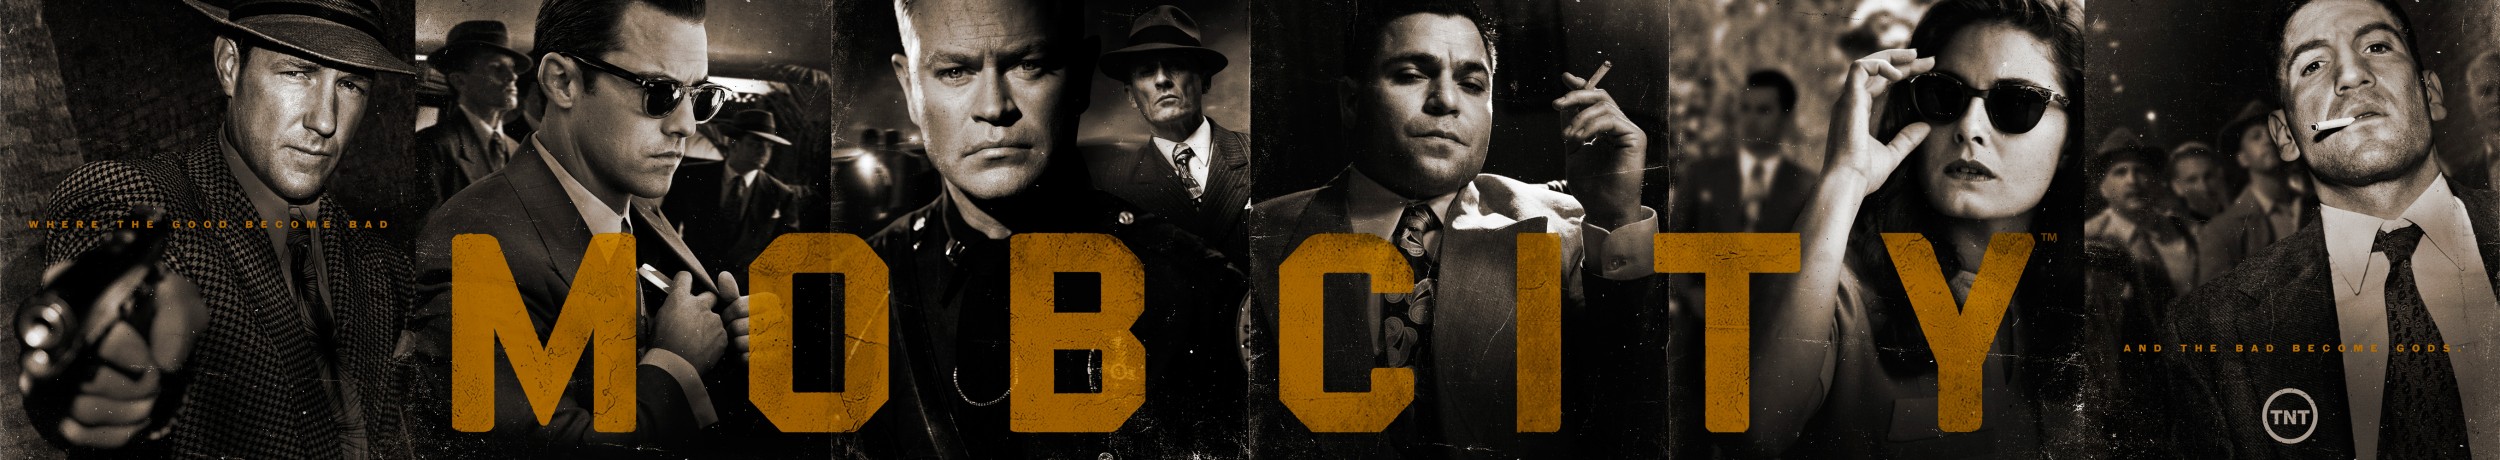 Extra Large TV Poster Image for Mob City (#8 of 8)